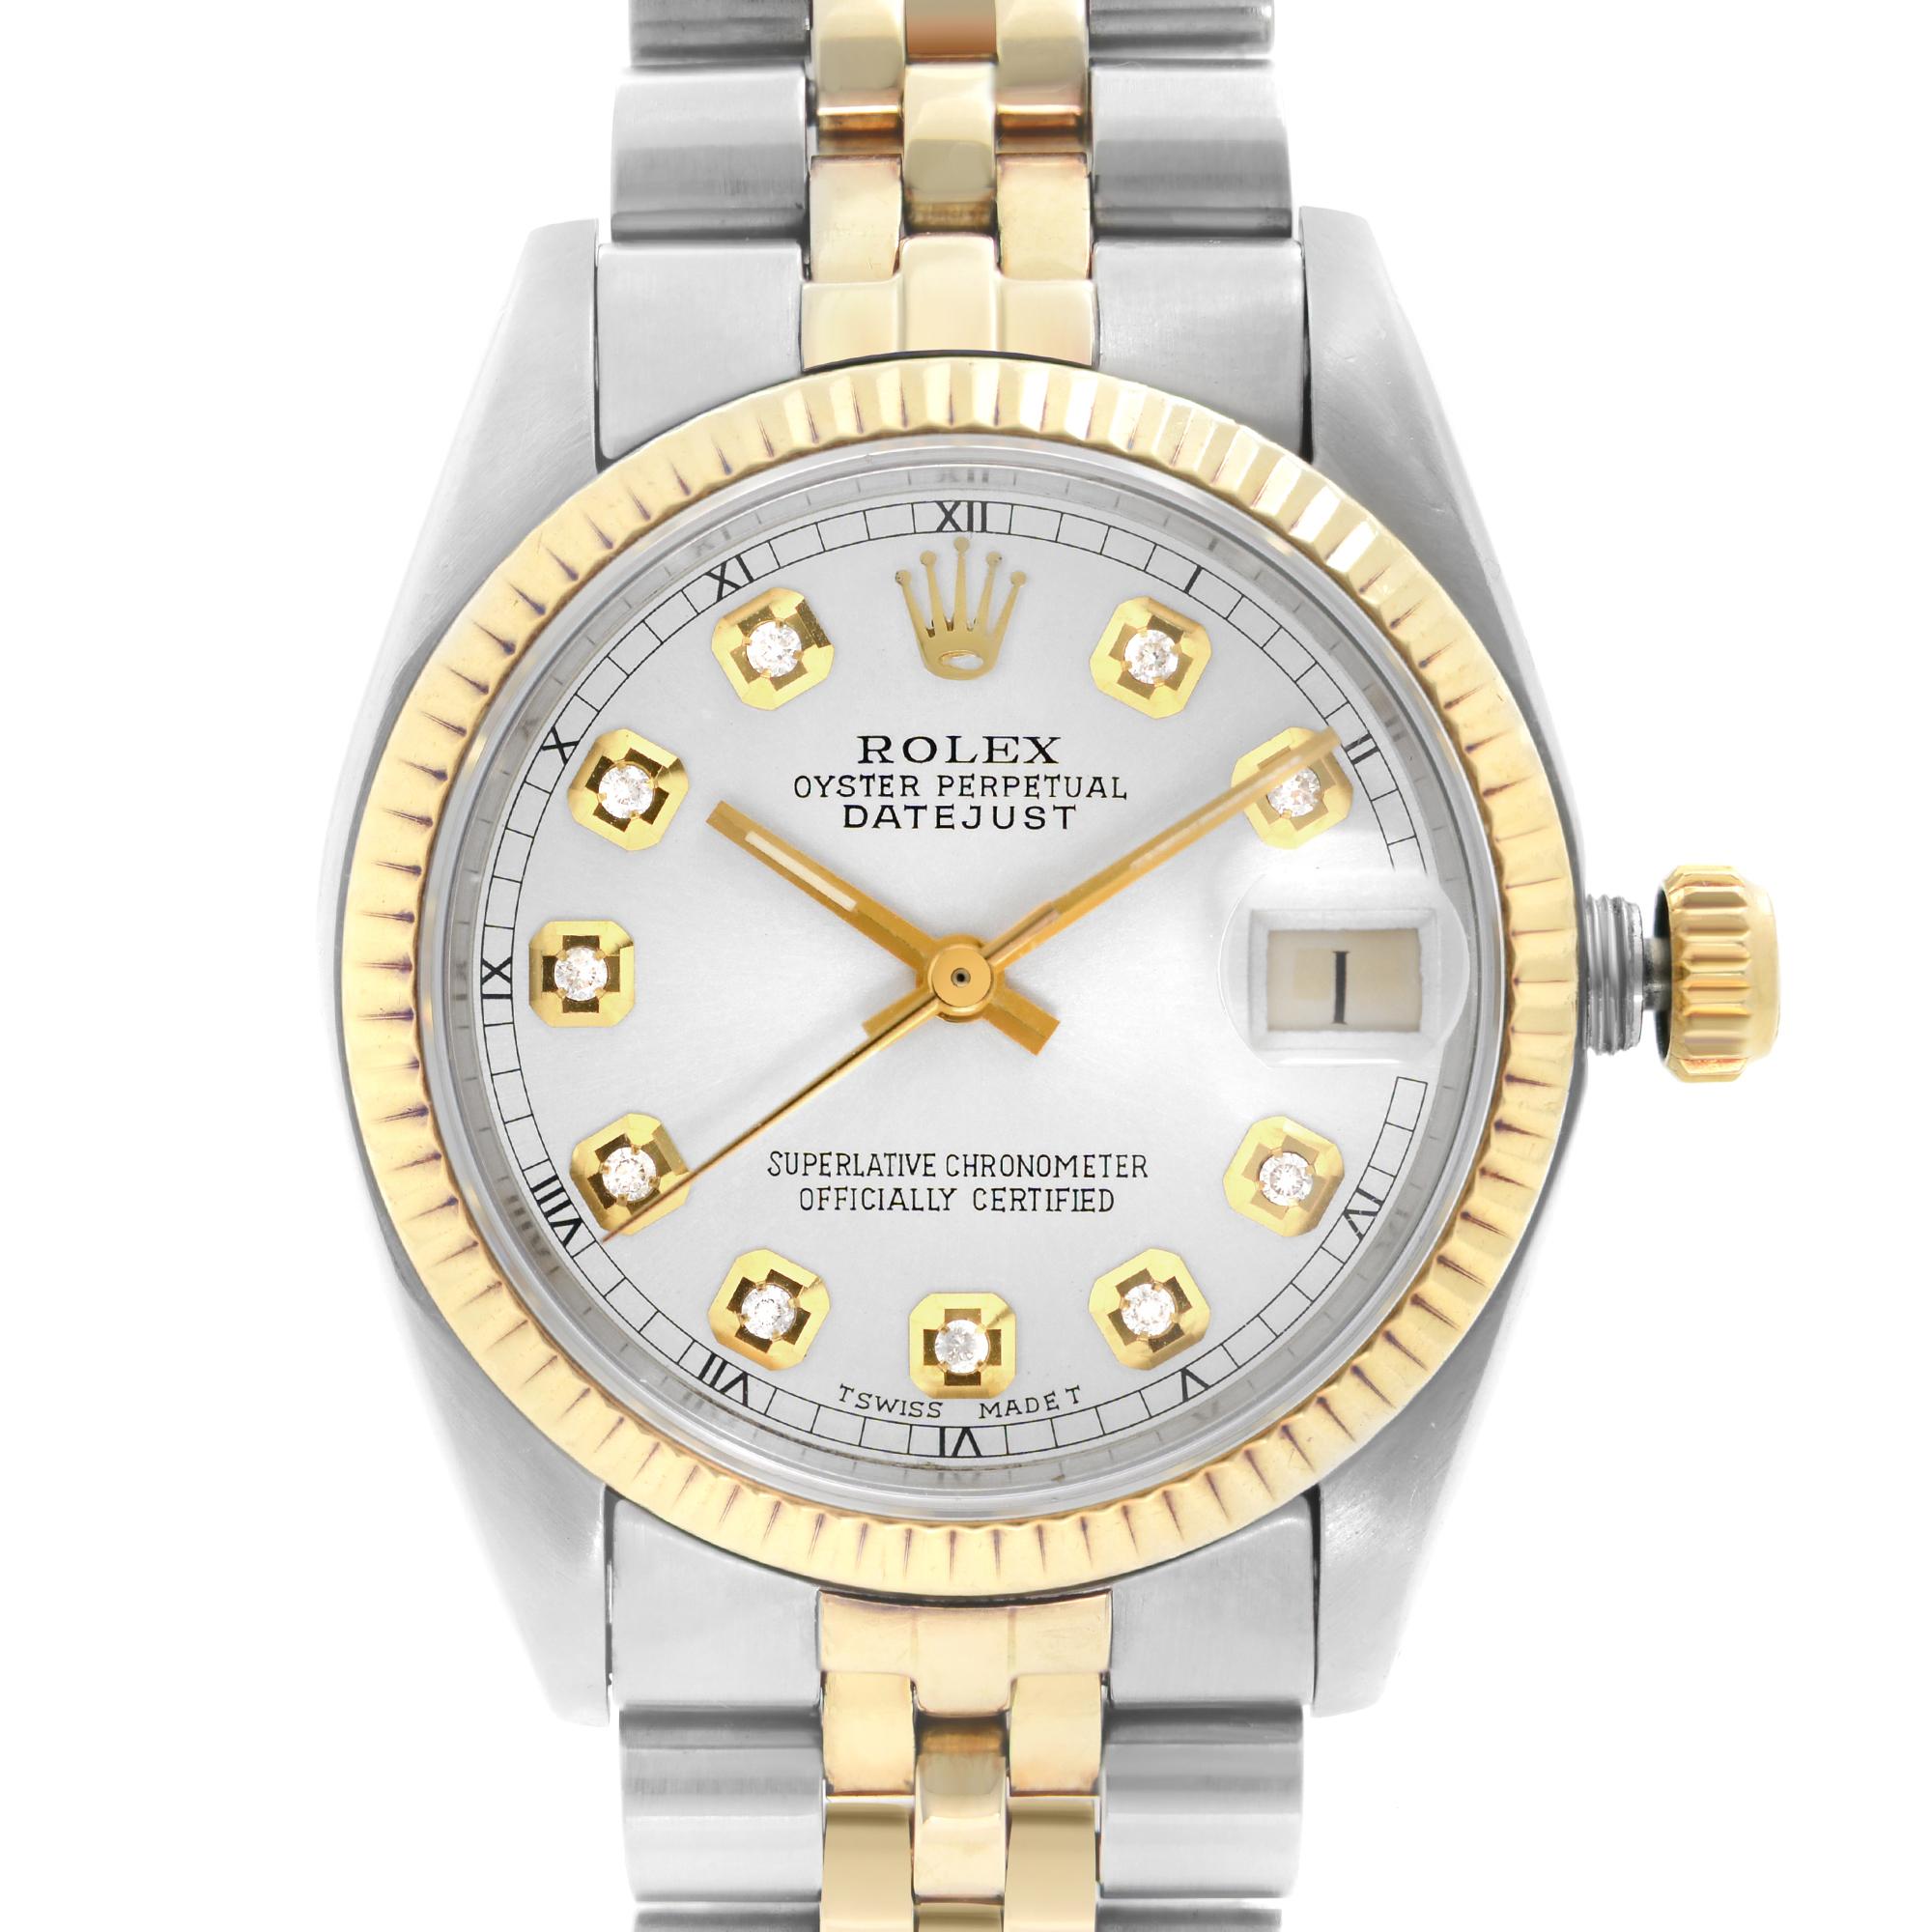 Pre Owned Rolex Oyster Perpetual Datejust Silver Dial Diamond Accent Ladies Watch 6827. The watch was produced in 1979. Custom Diamond dial. Minor glue sign underneath Rolex logo during the customization process. the bracelet has moderate slack. 